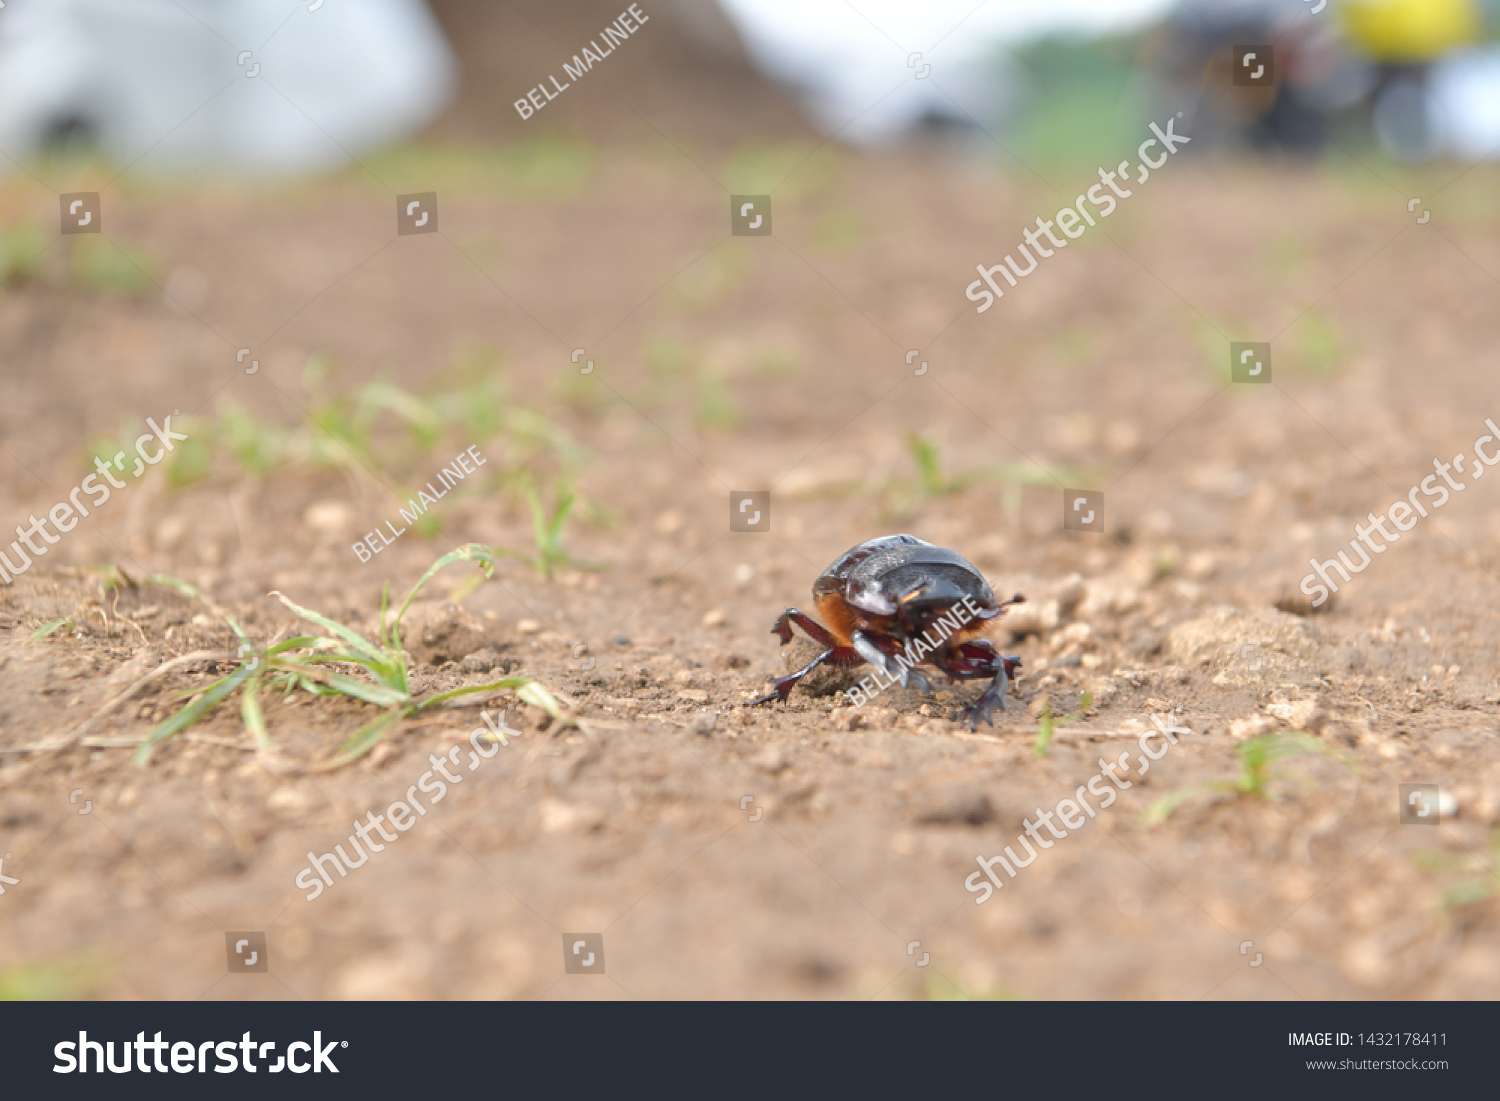 black beetle crawling on soil and grass,Beetles in nature. #1432178411